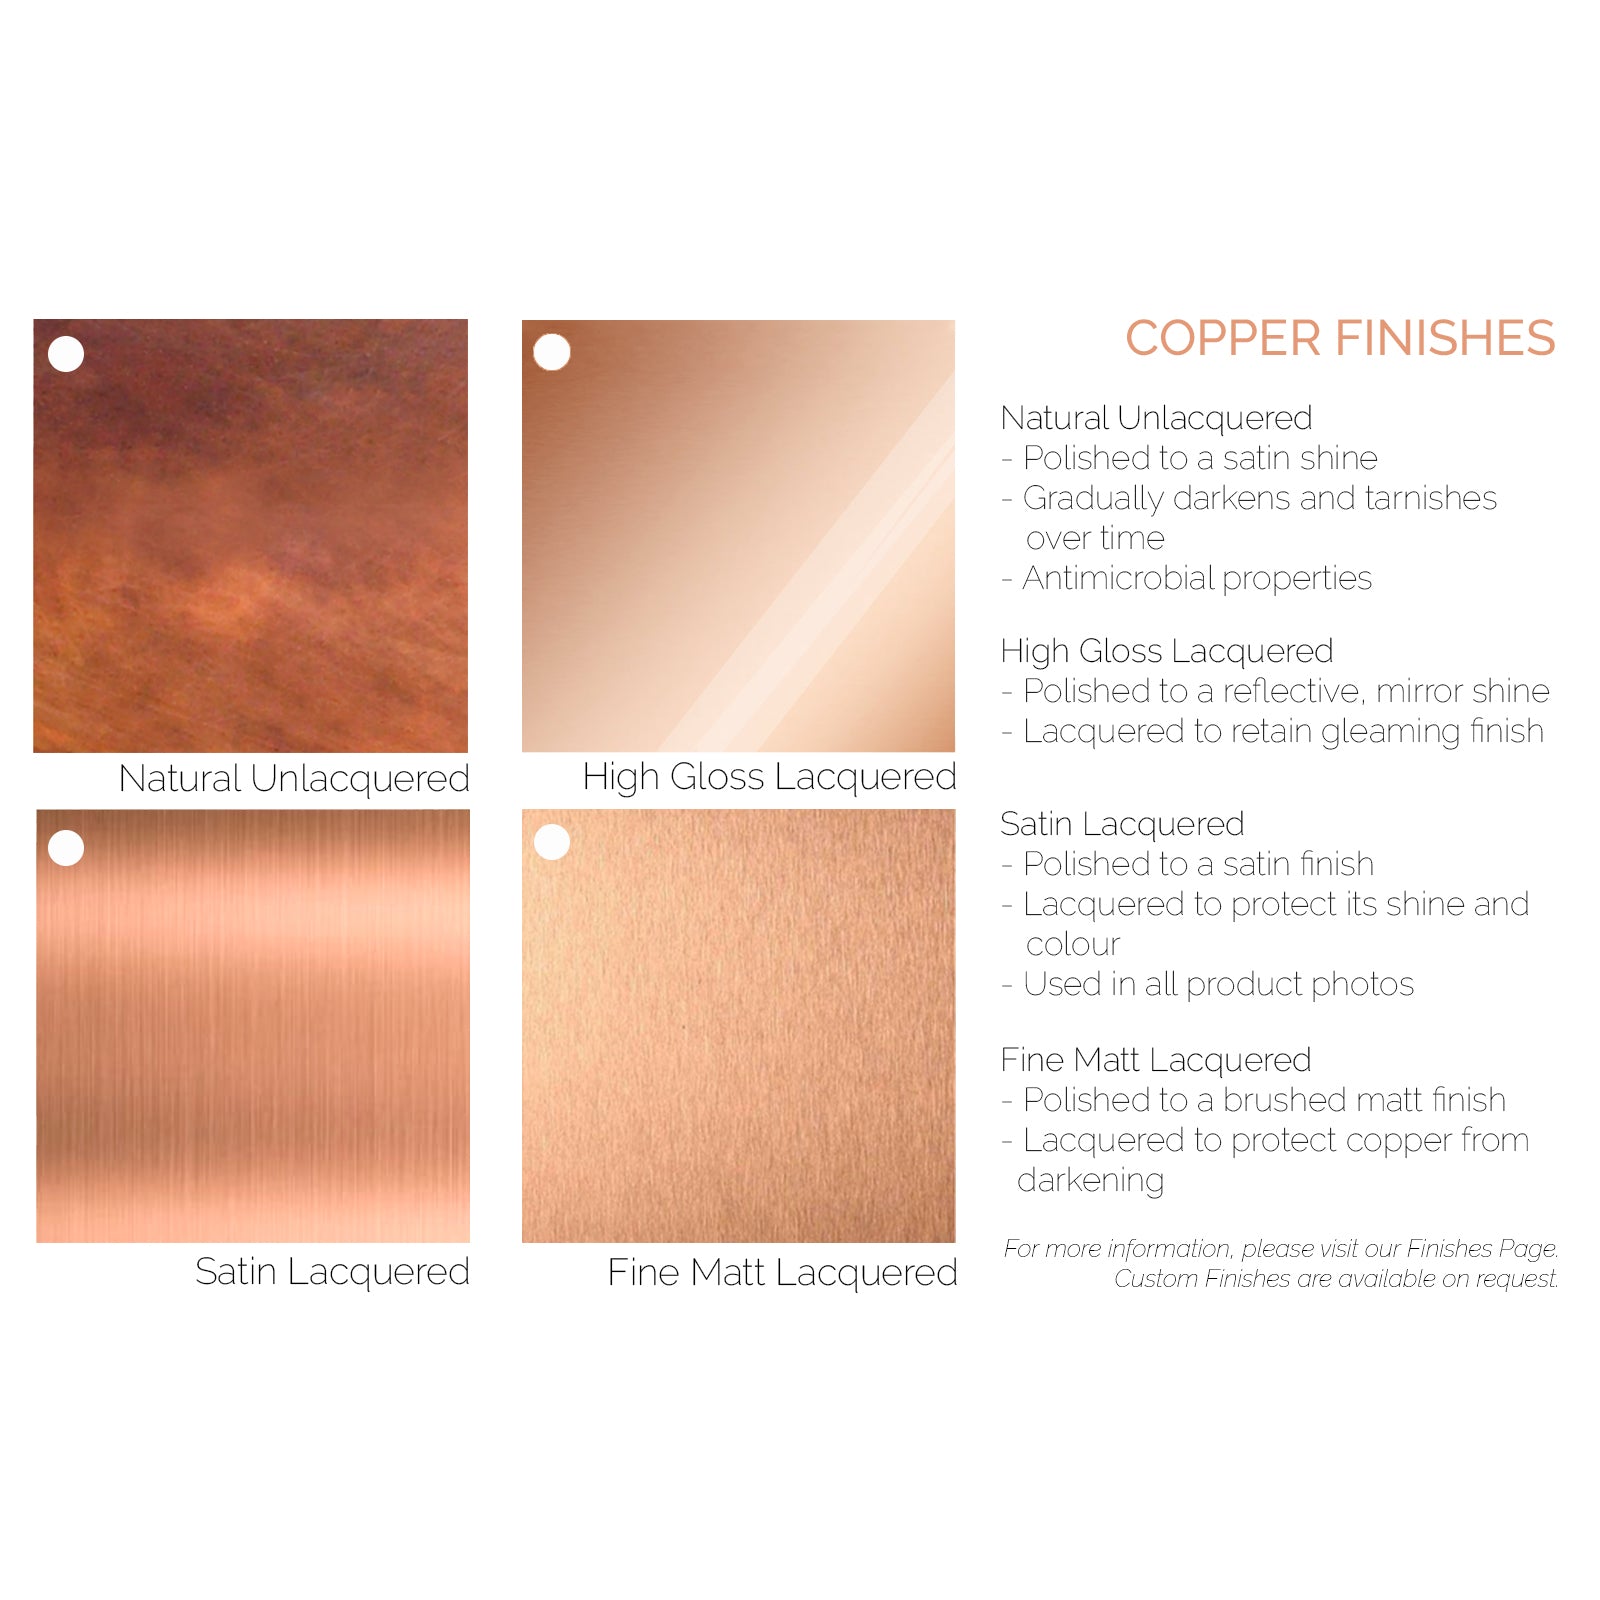 Copper finishes